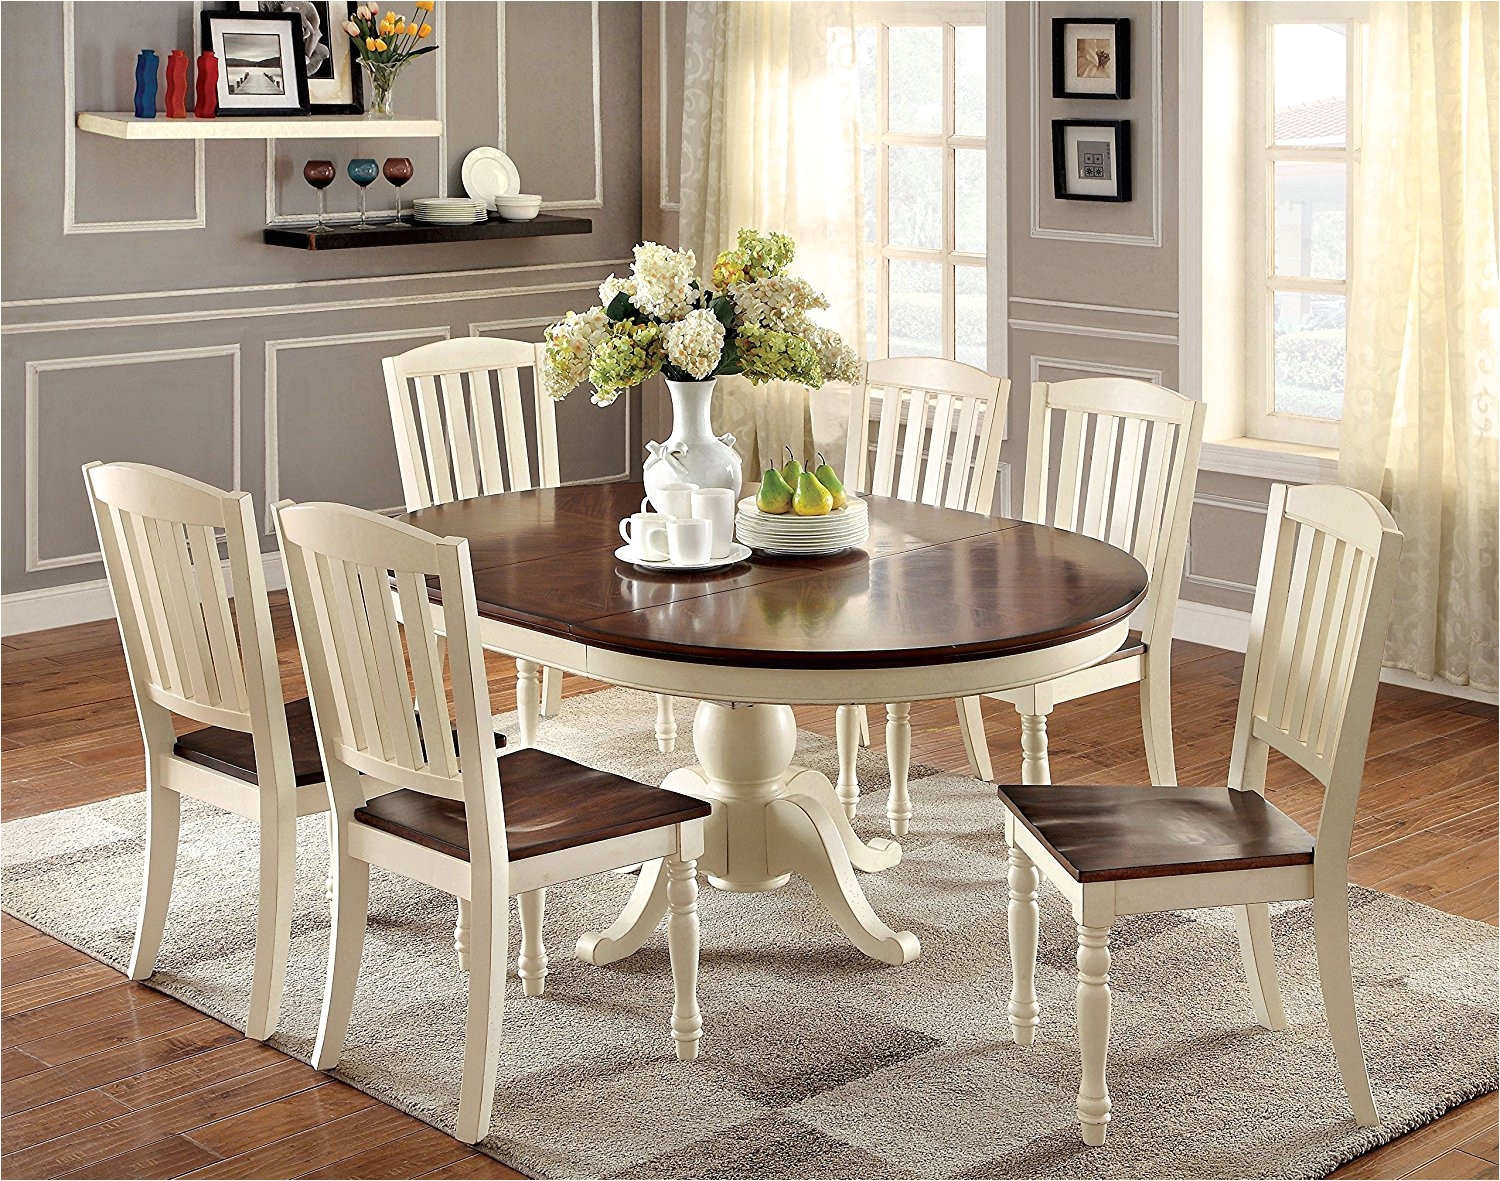 pottery barn distressed furniture fresh smart solid wood dining table set ideas od dining room tables and